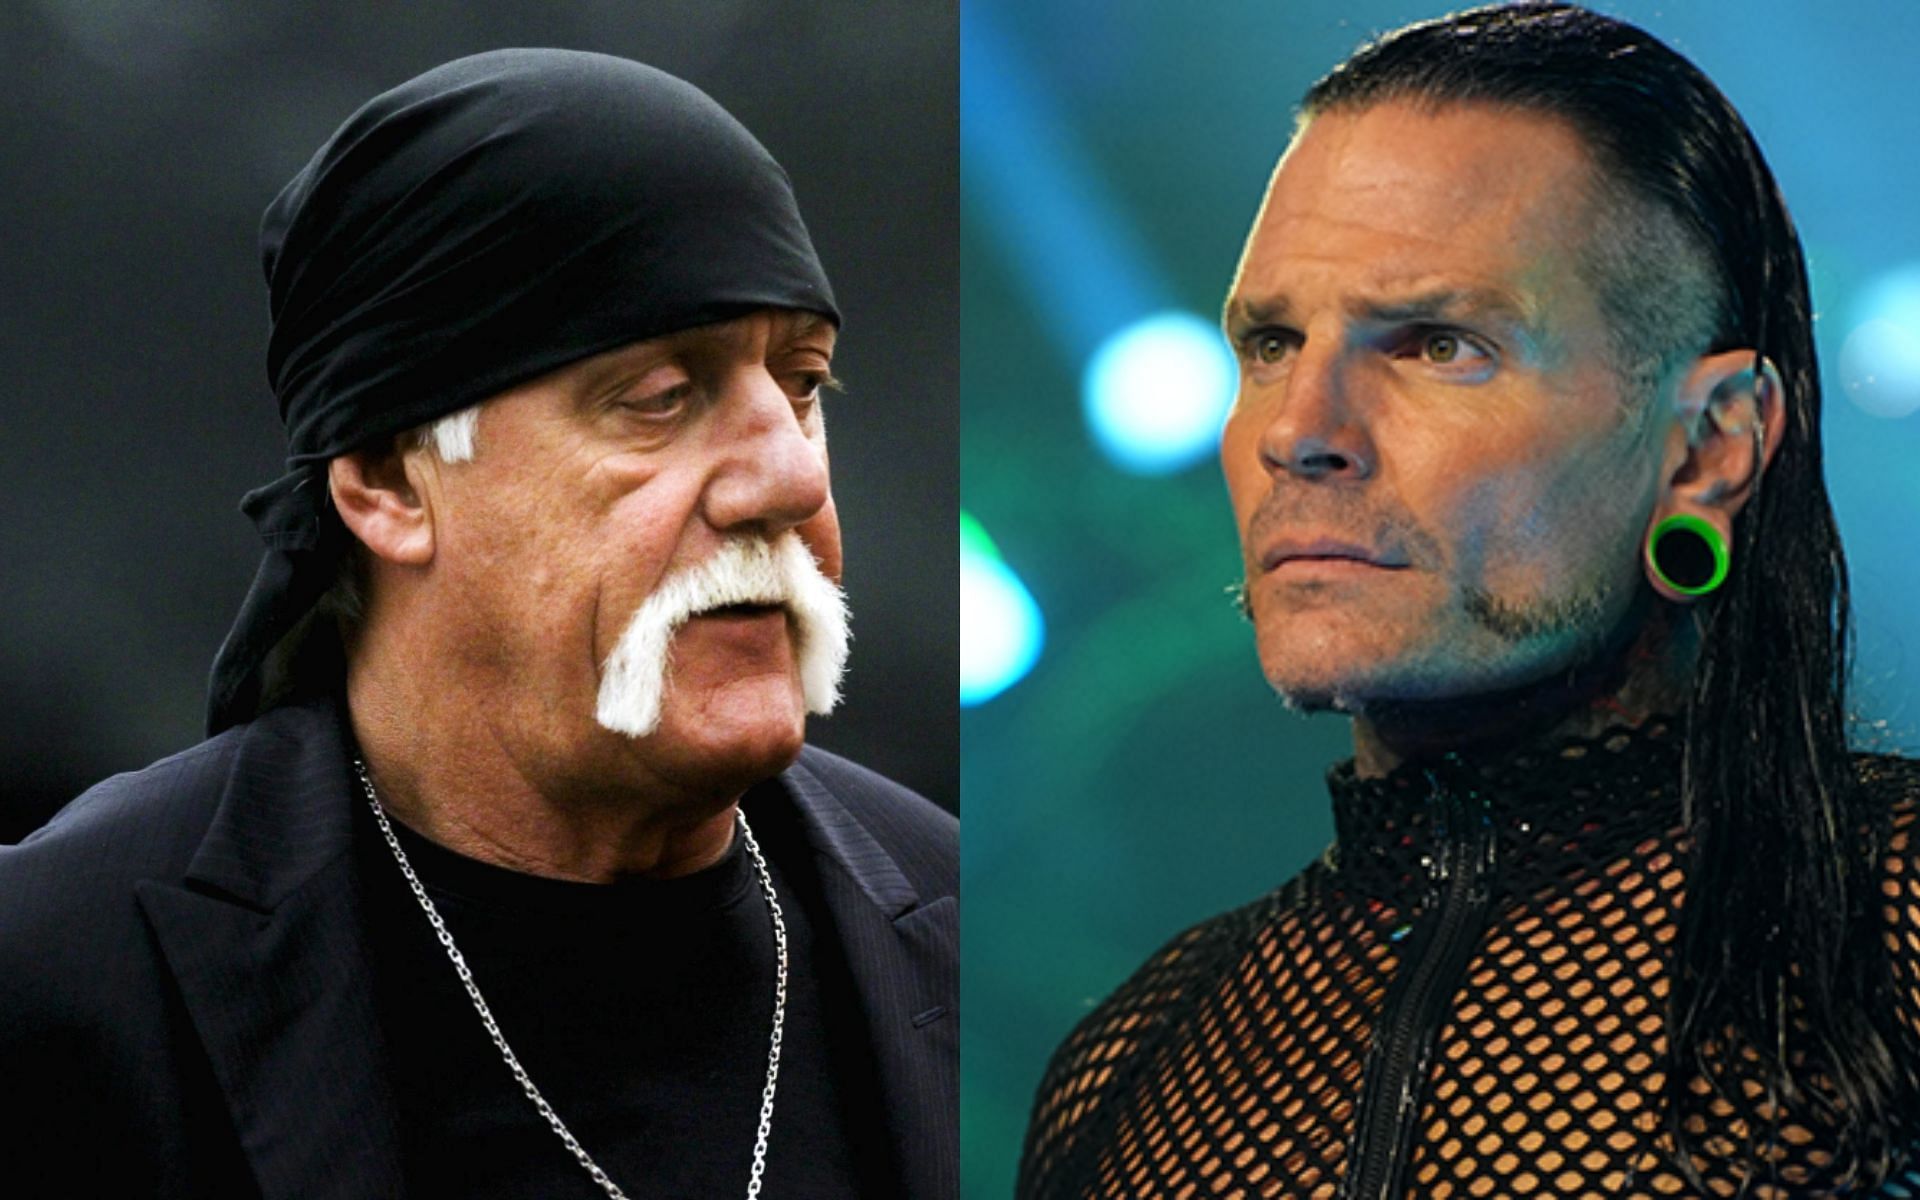 Hulk Hogan (L) and Jeff Hardy (R) have both done something questionable during their time at WWE.